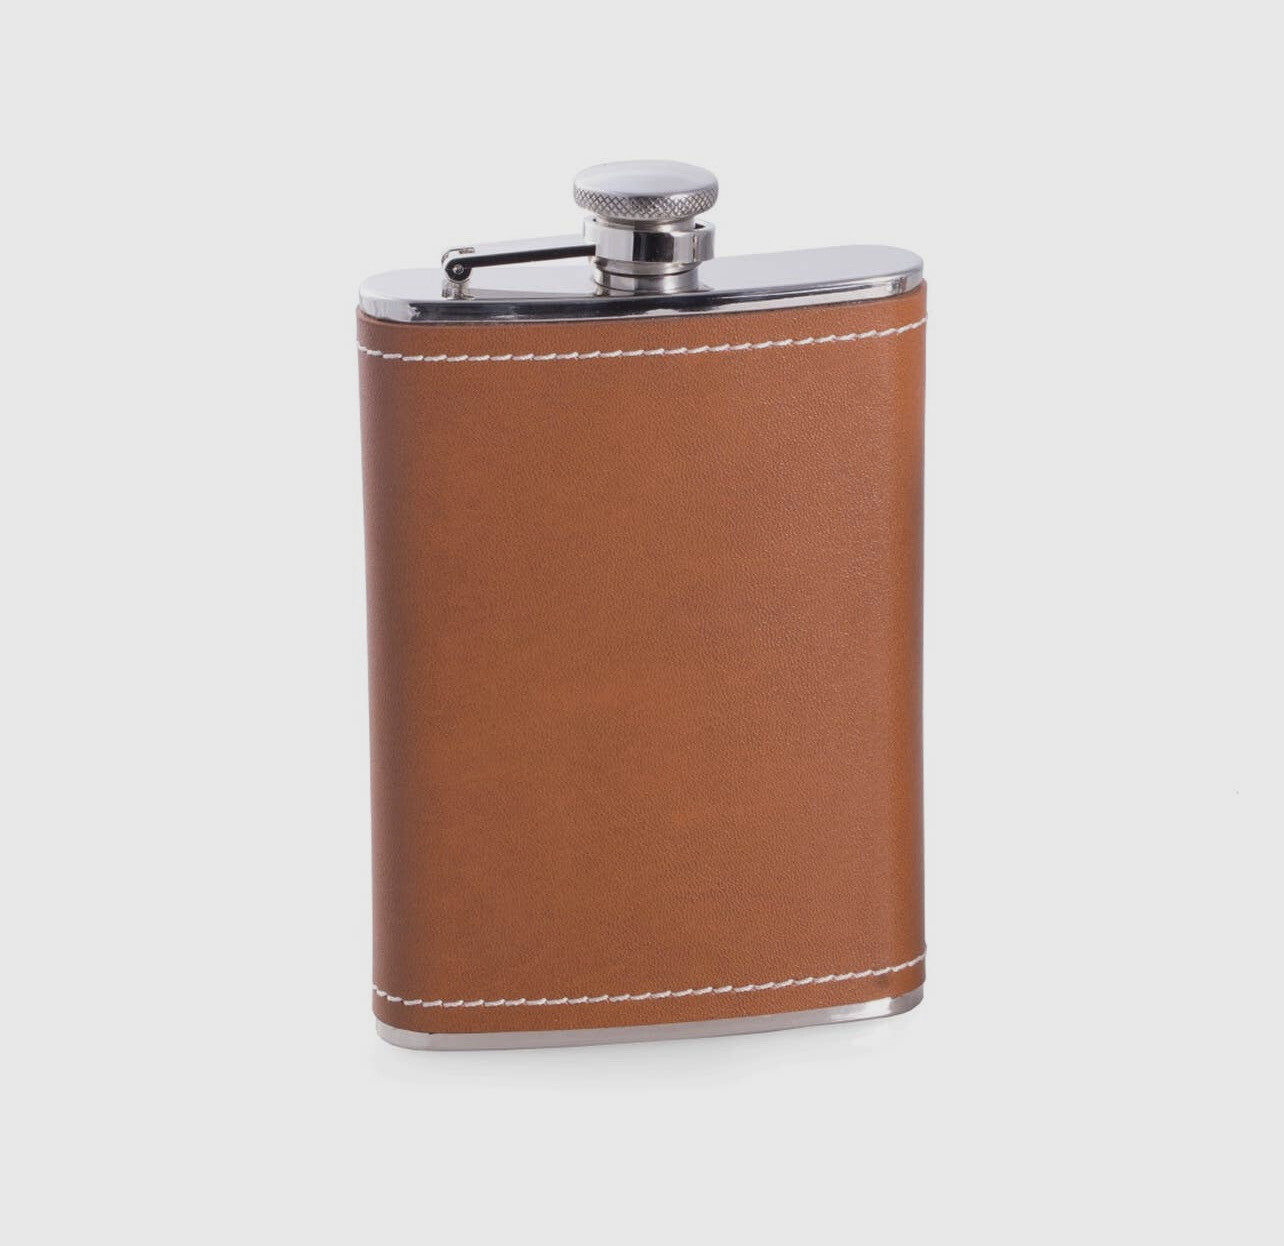 8oz Stainless Steel Brown Leather Flask